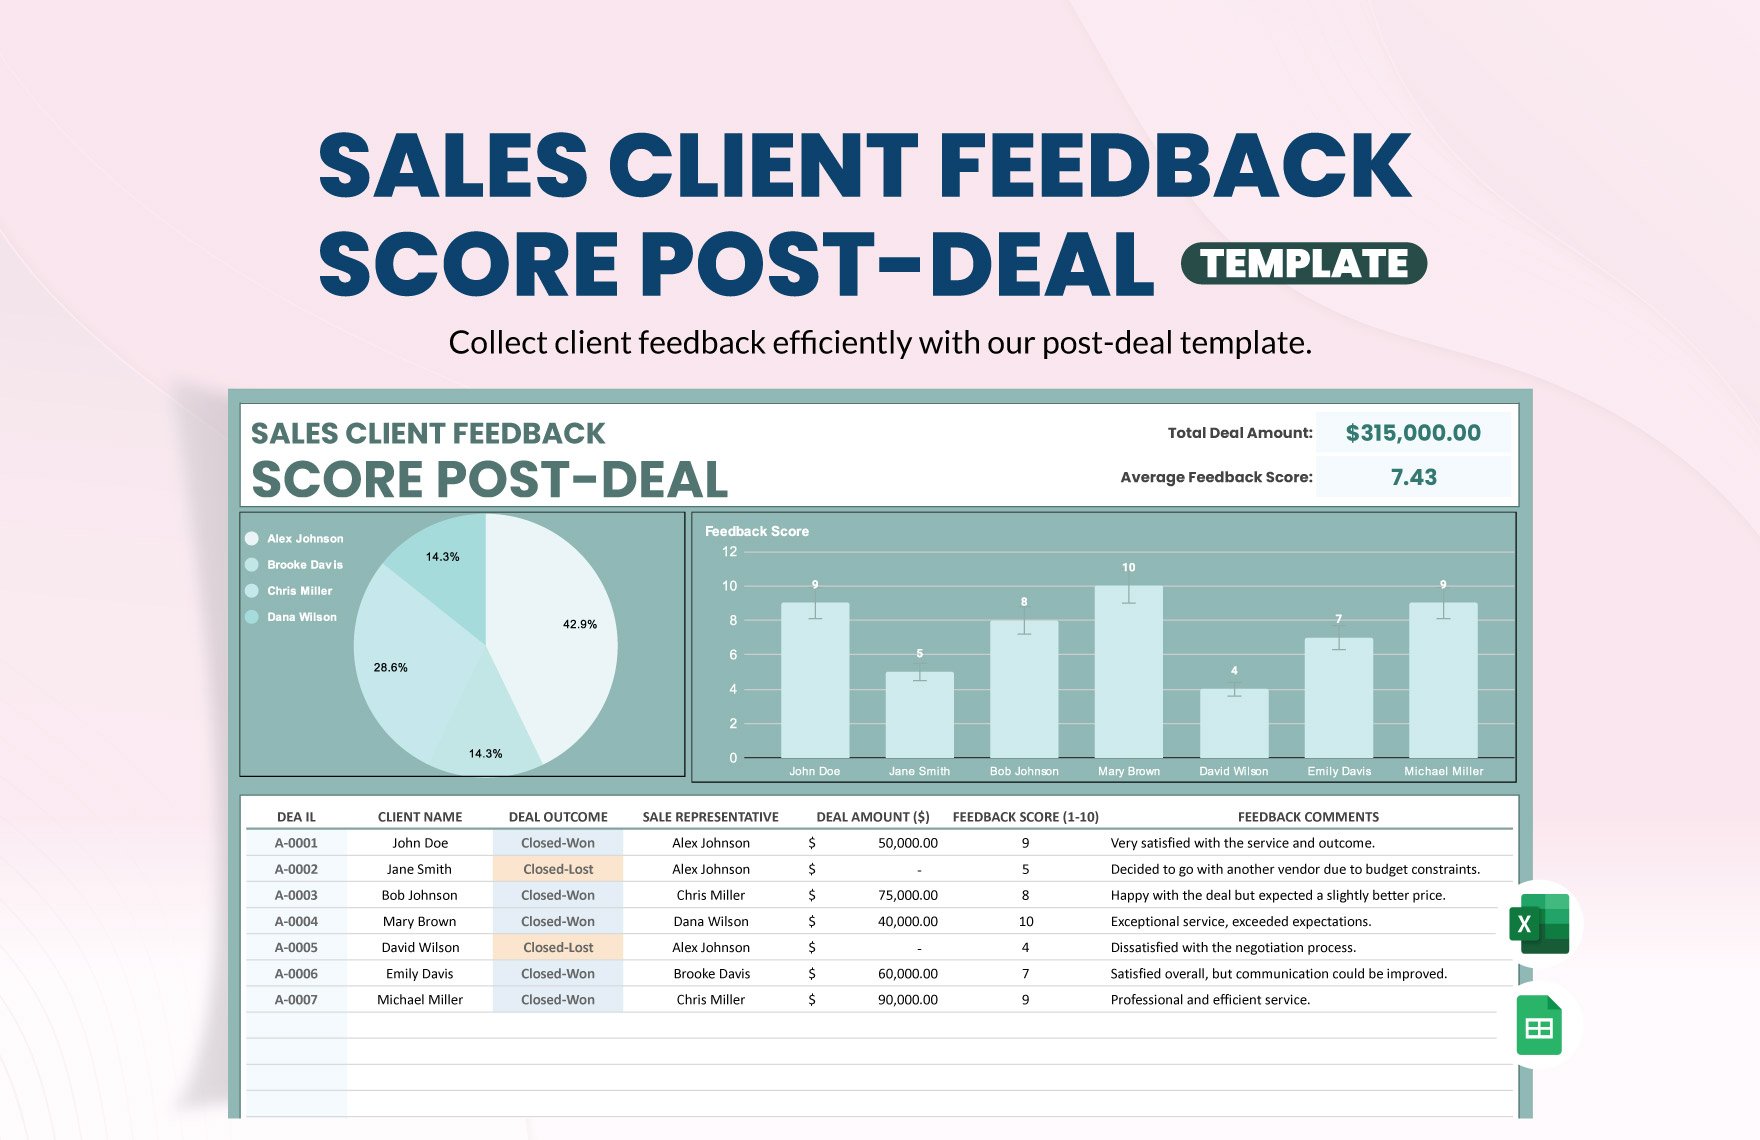 Sales Client Feedback Score Post-Deal Template